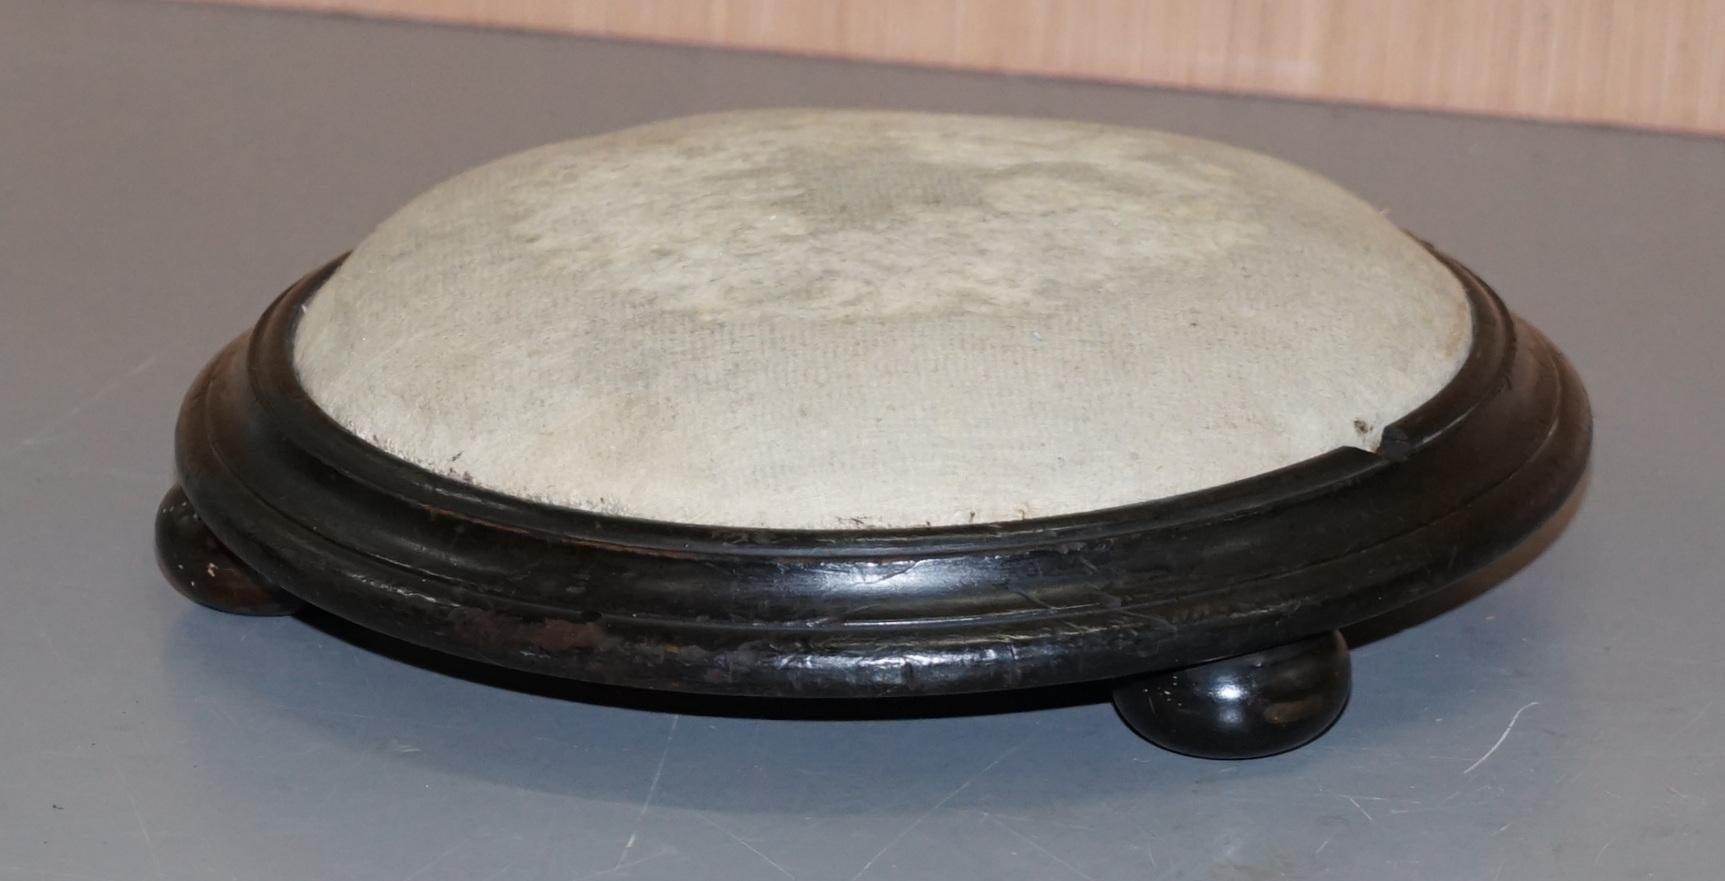 We are delighted to offer for sale this lovely very small Georgian footstool with original upholstery

A good looking period original stool, very small by modern standards, its totally original, the ebonized frame, the upholstery

The condition